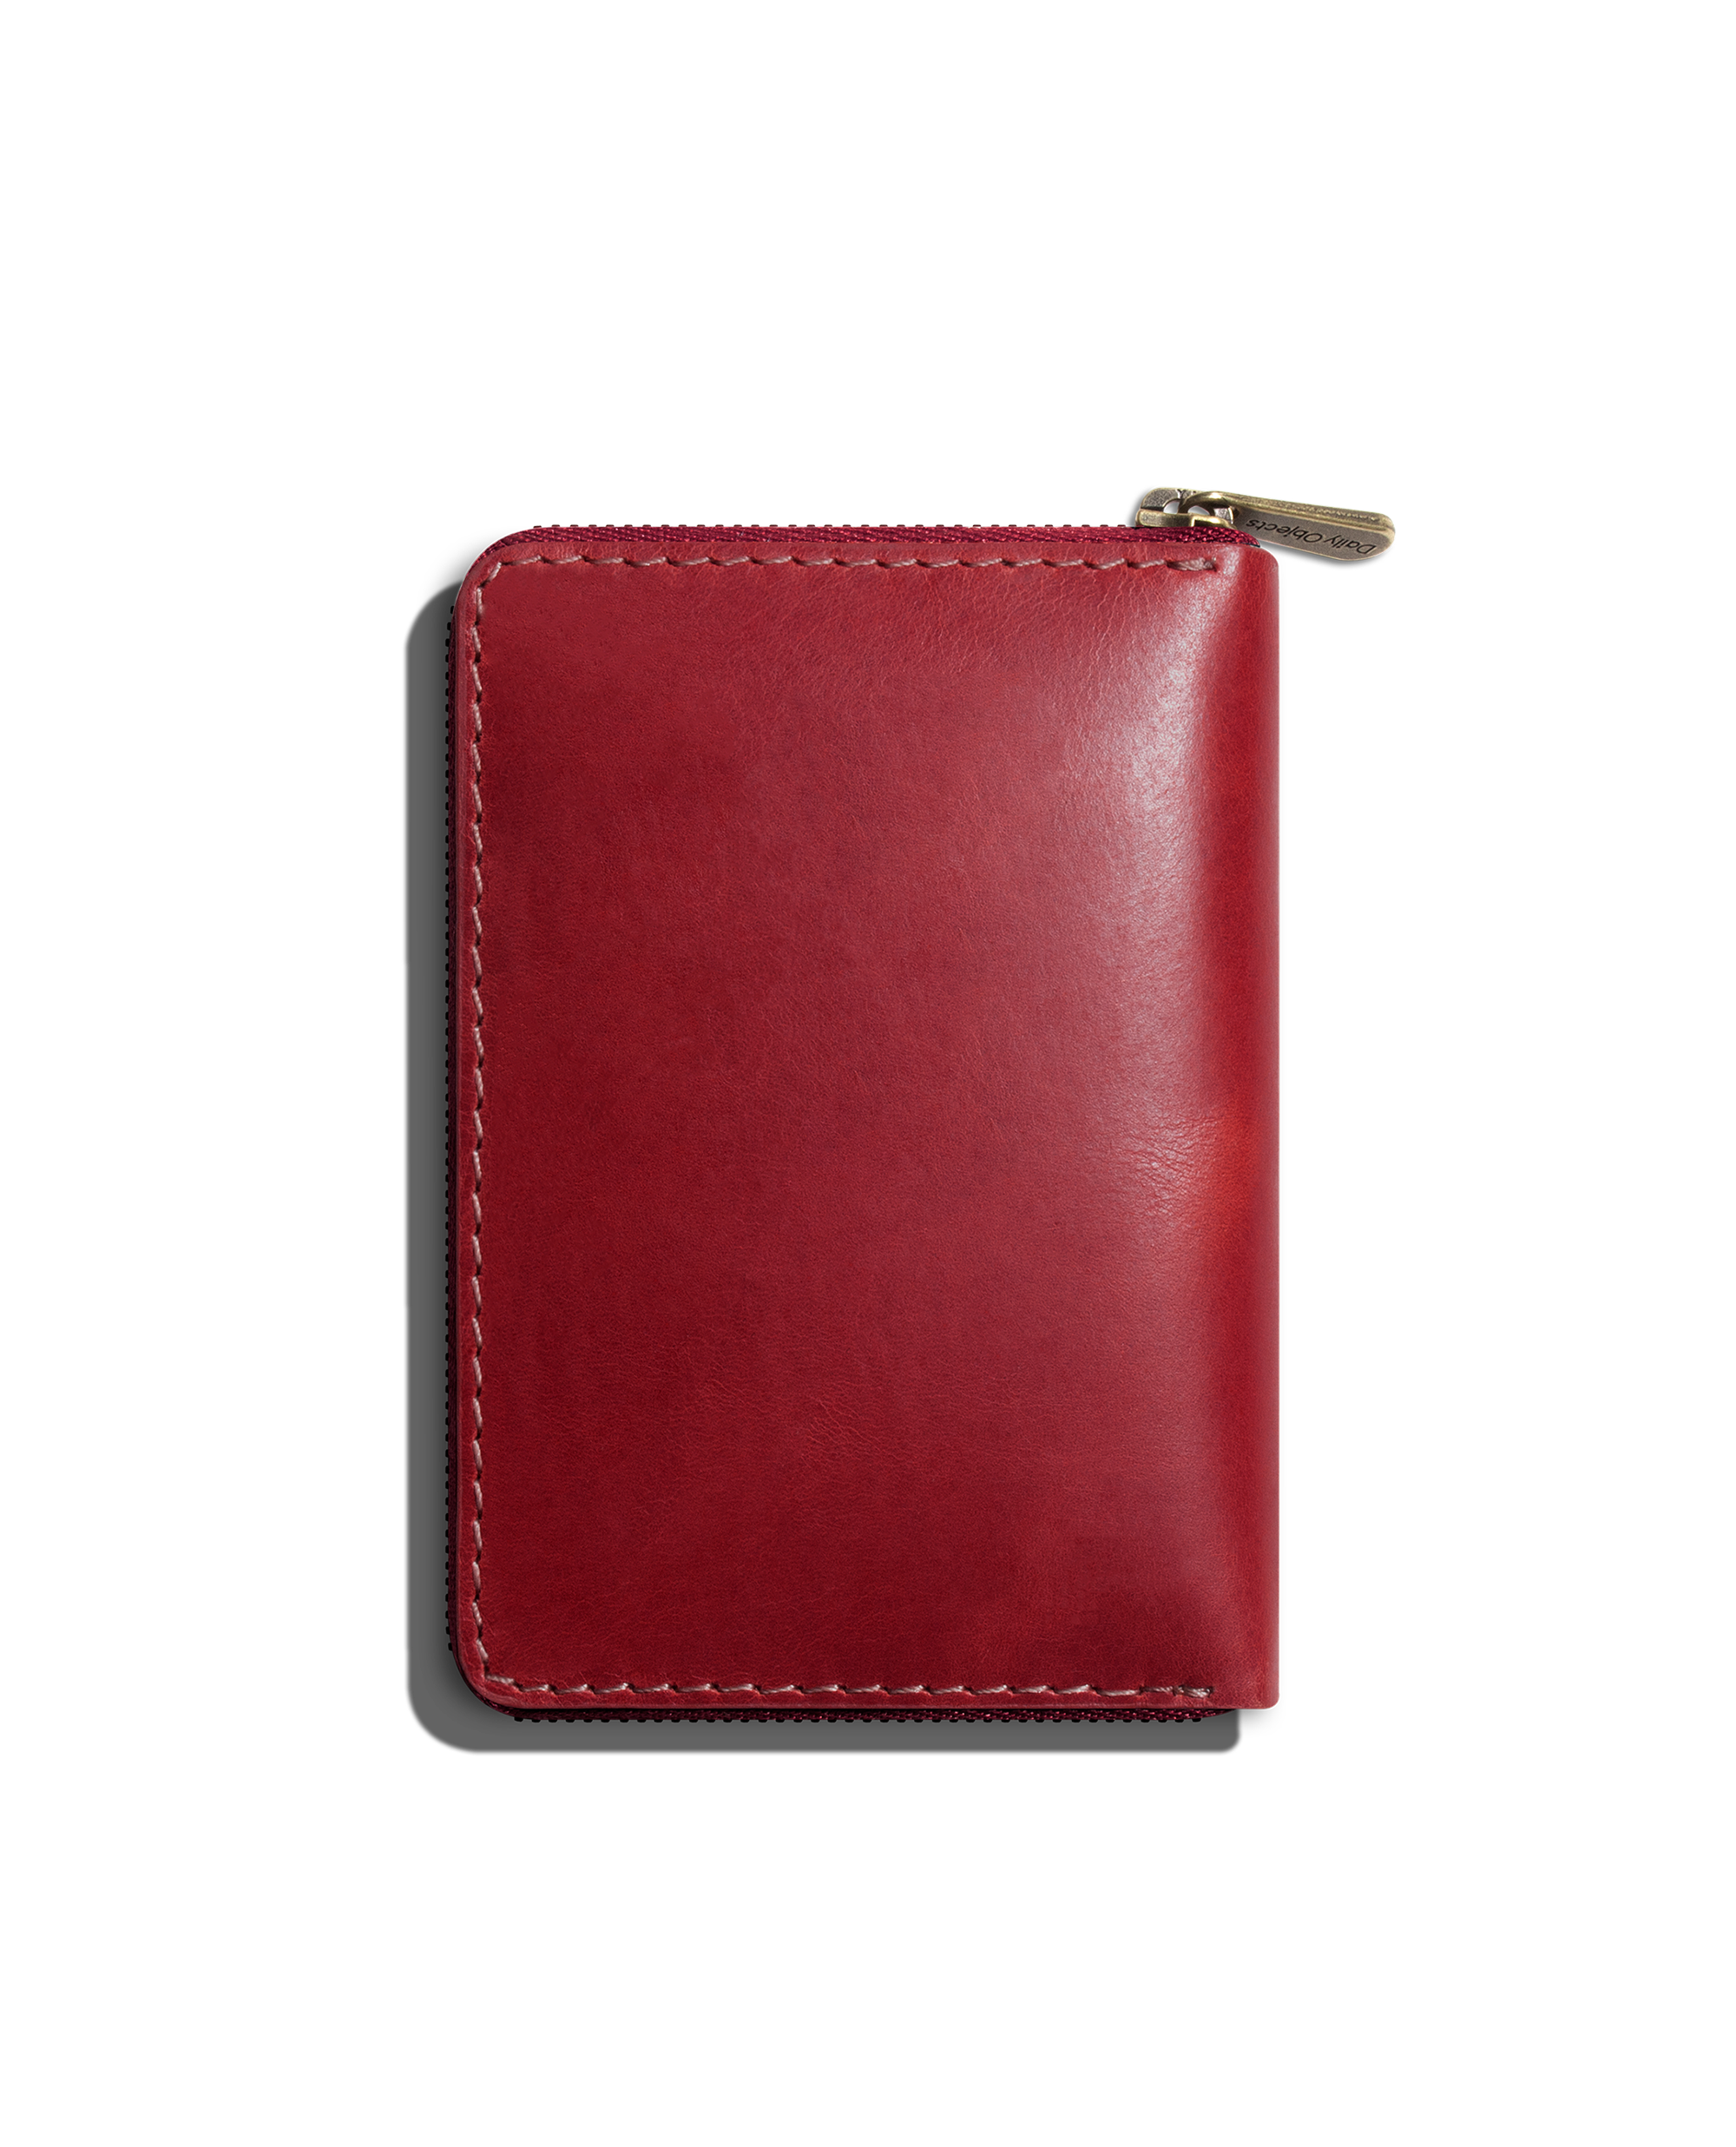 SUNICETY PU Leather Zipper Men Folding Wallet RFID Blocking Cards Cash  Storage Bag - Wine Red Wholesale | TVCMALL